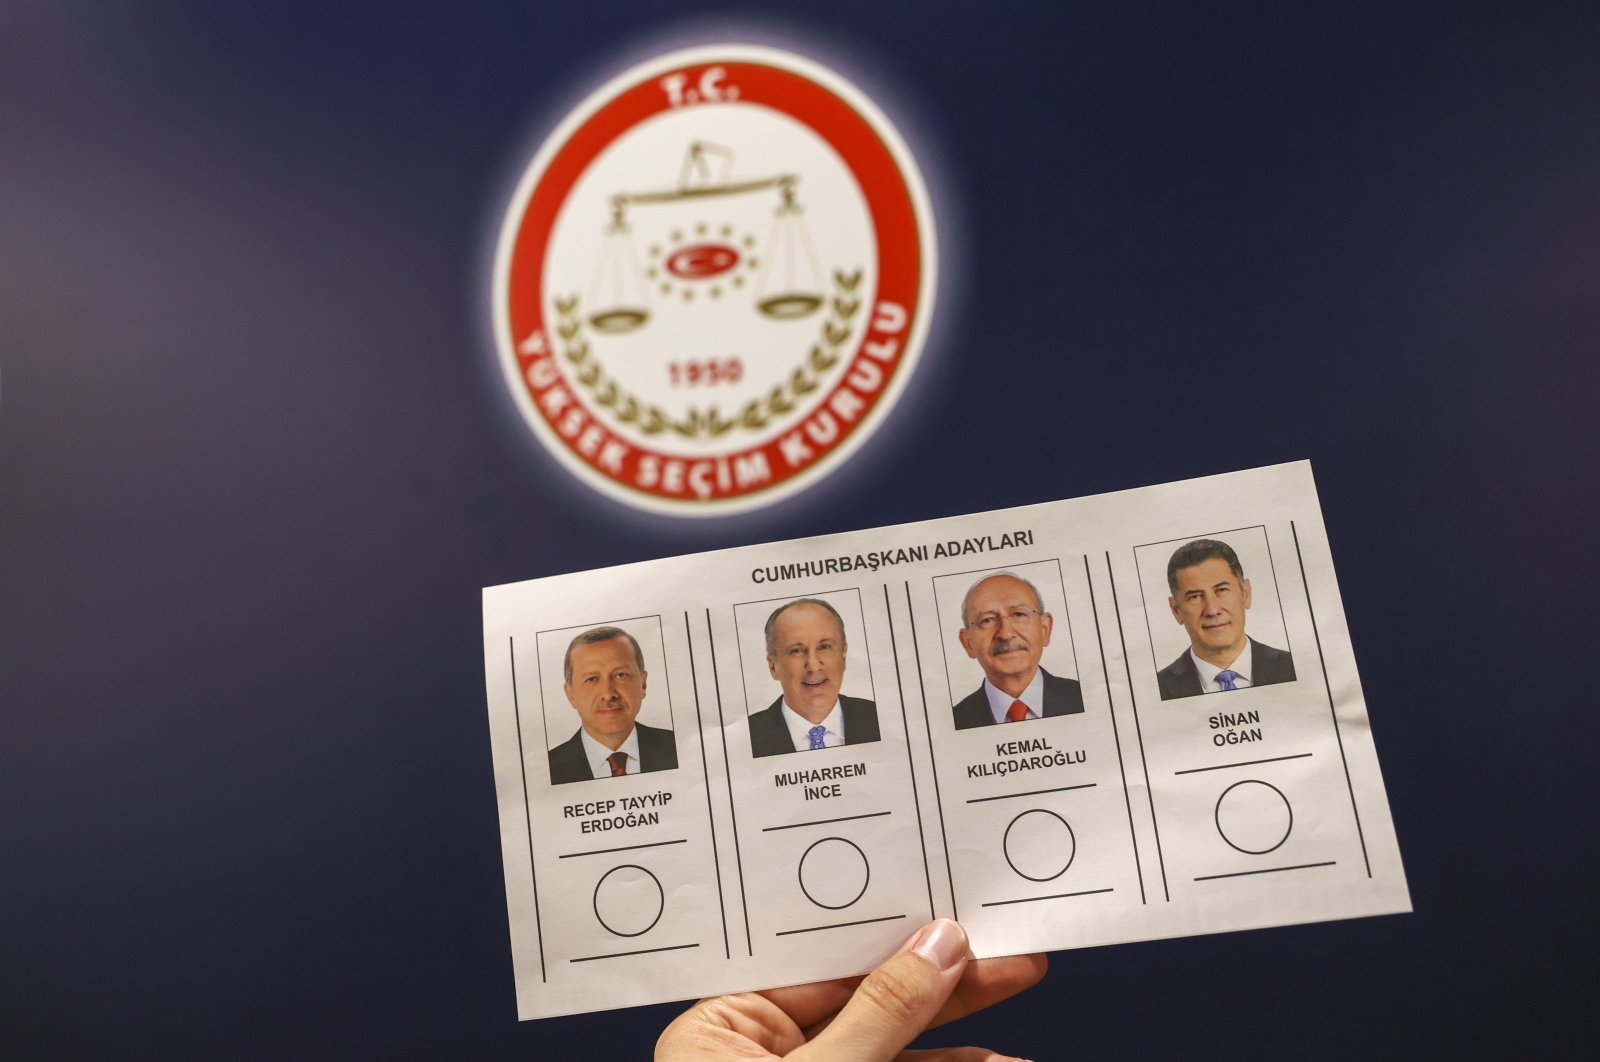 The ballot paper prepared by the Supreme Election Council (YSK) for the May 14 elections lists the presidential candidates in the following order from left to right: Recep Tayyip Erdoğan, Muharrem Ince, Kemal Kılıçdaroğlu and Sinan Oğan, Türkiye, April 14, 2023. (AA Photo)